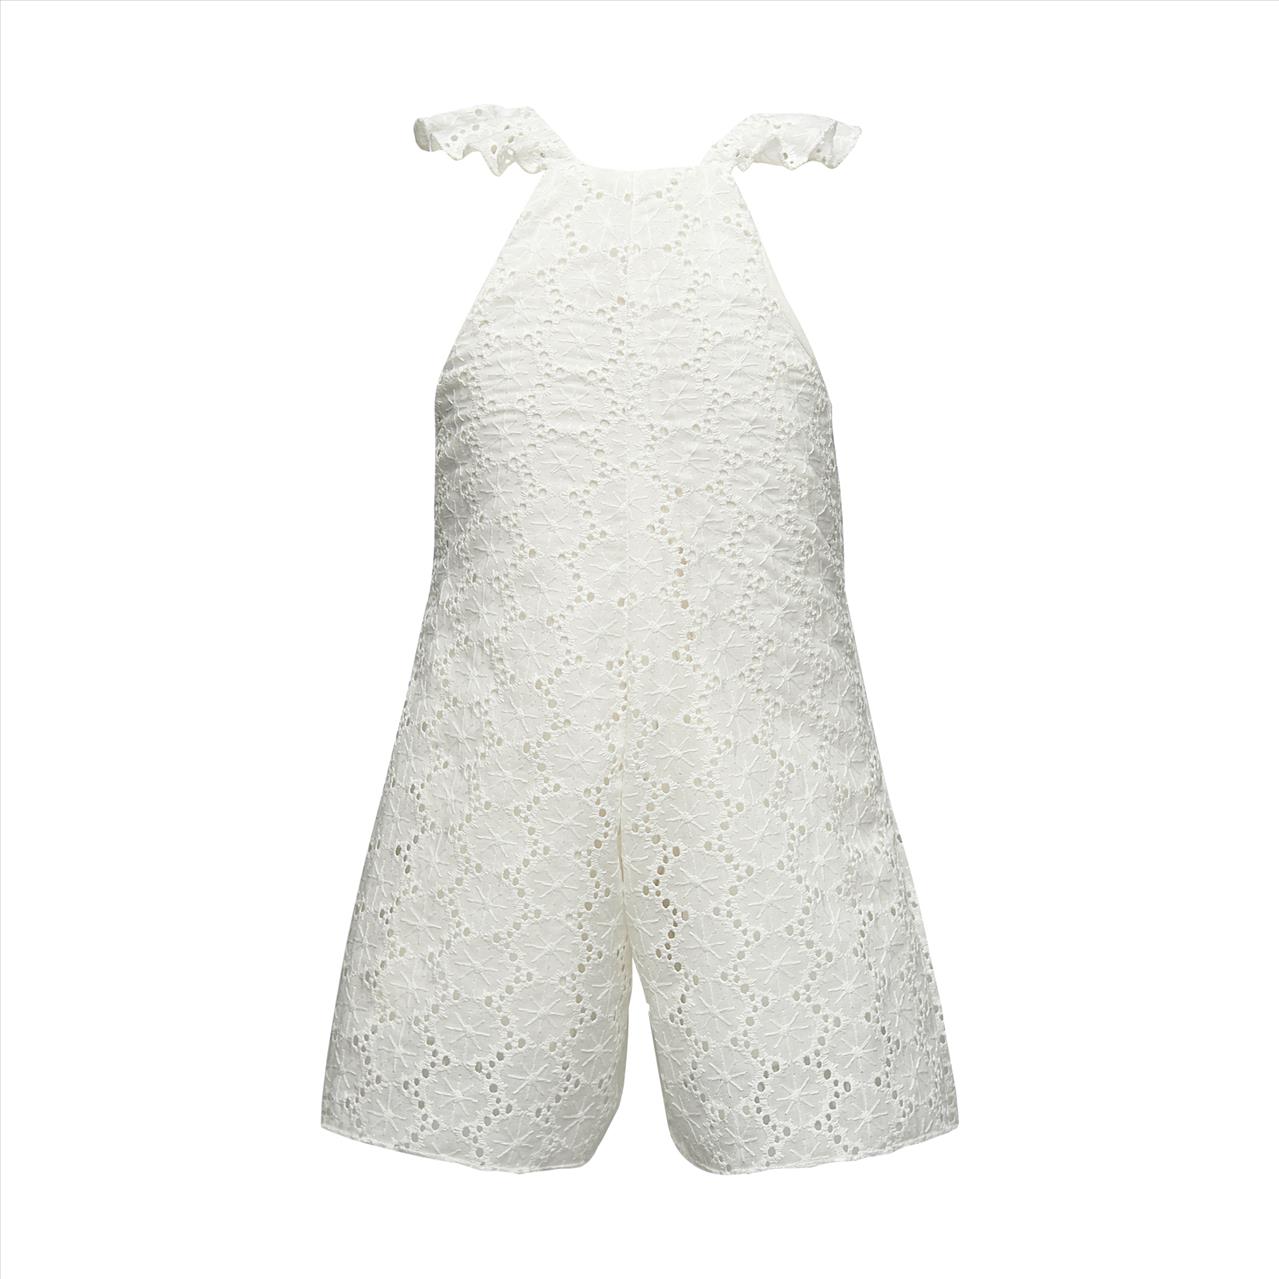 PLAYSUIT BRODERIE TWO IN A CASTLE